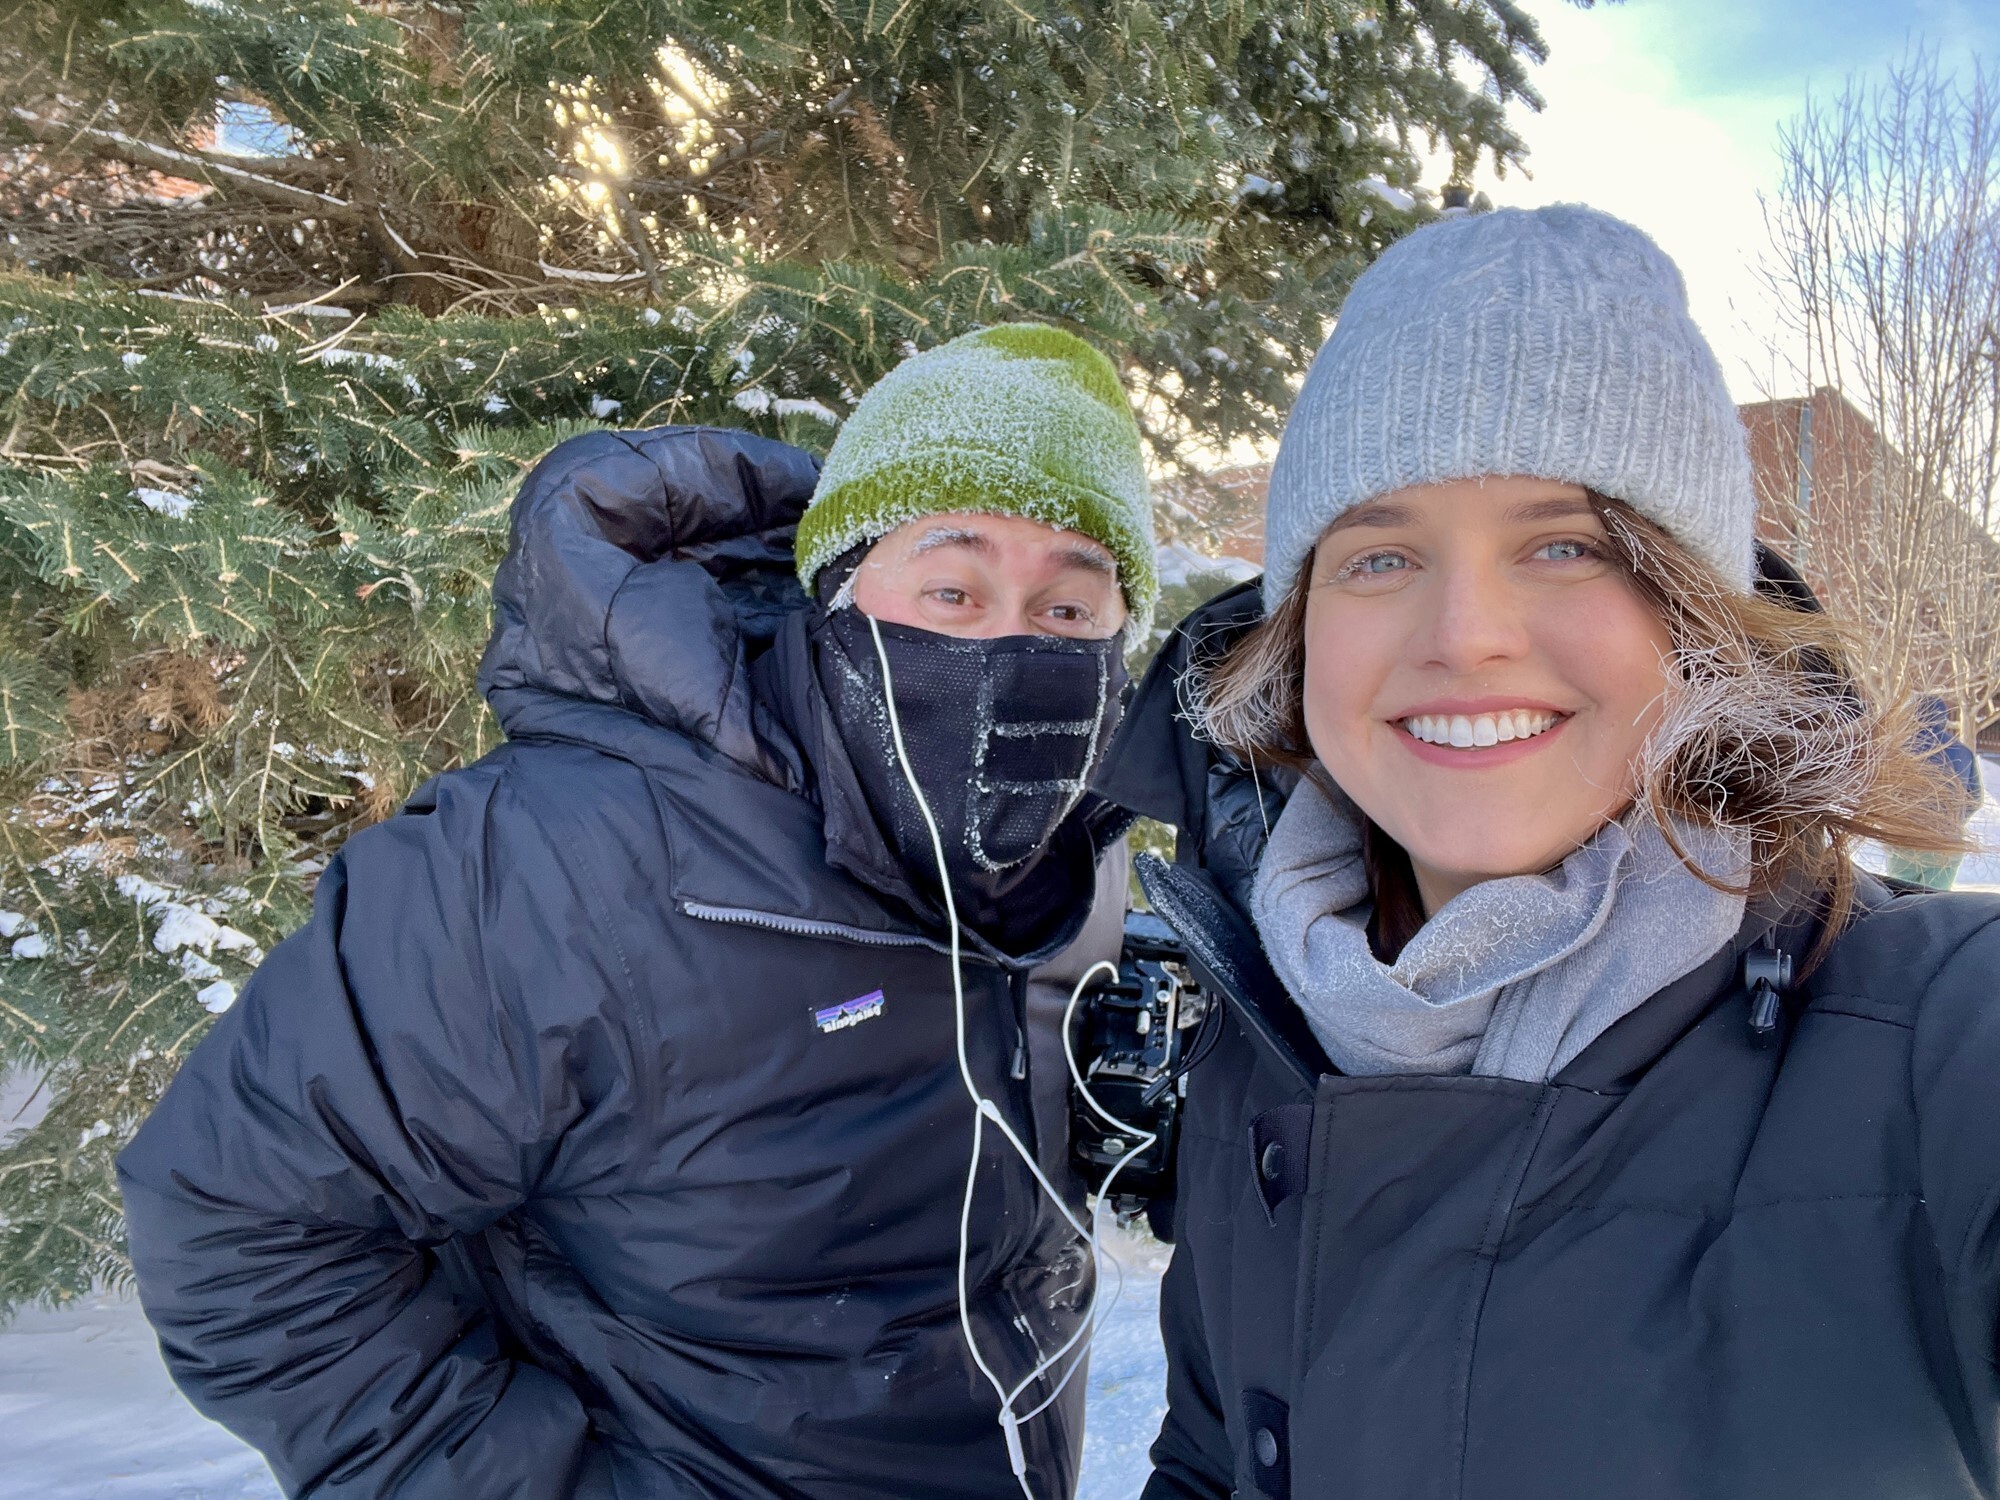 Two people in winter coats and hats, with snow in their hair and eyebrows, smile together